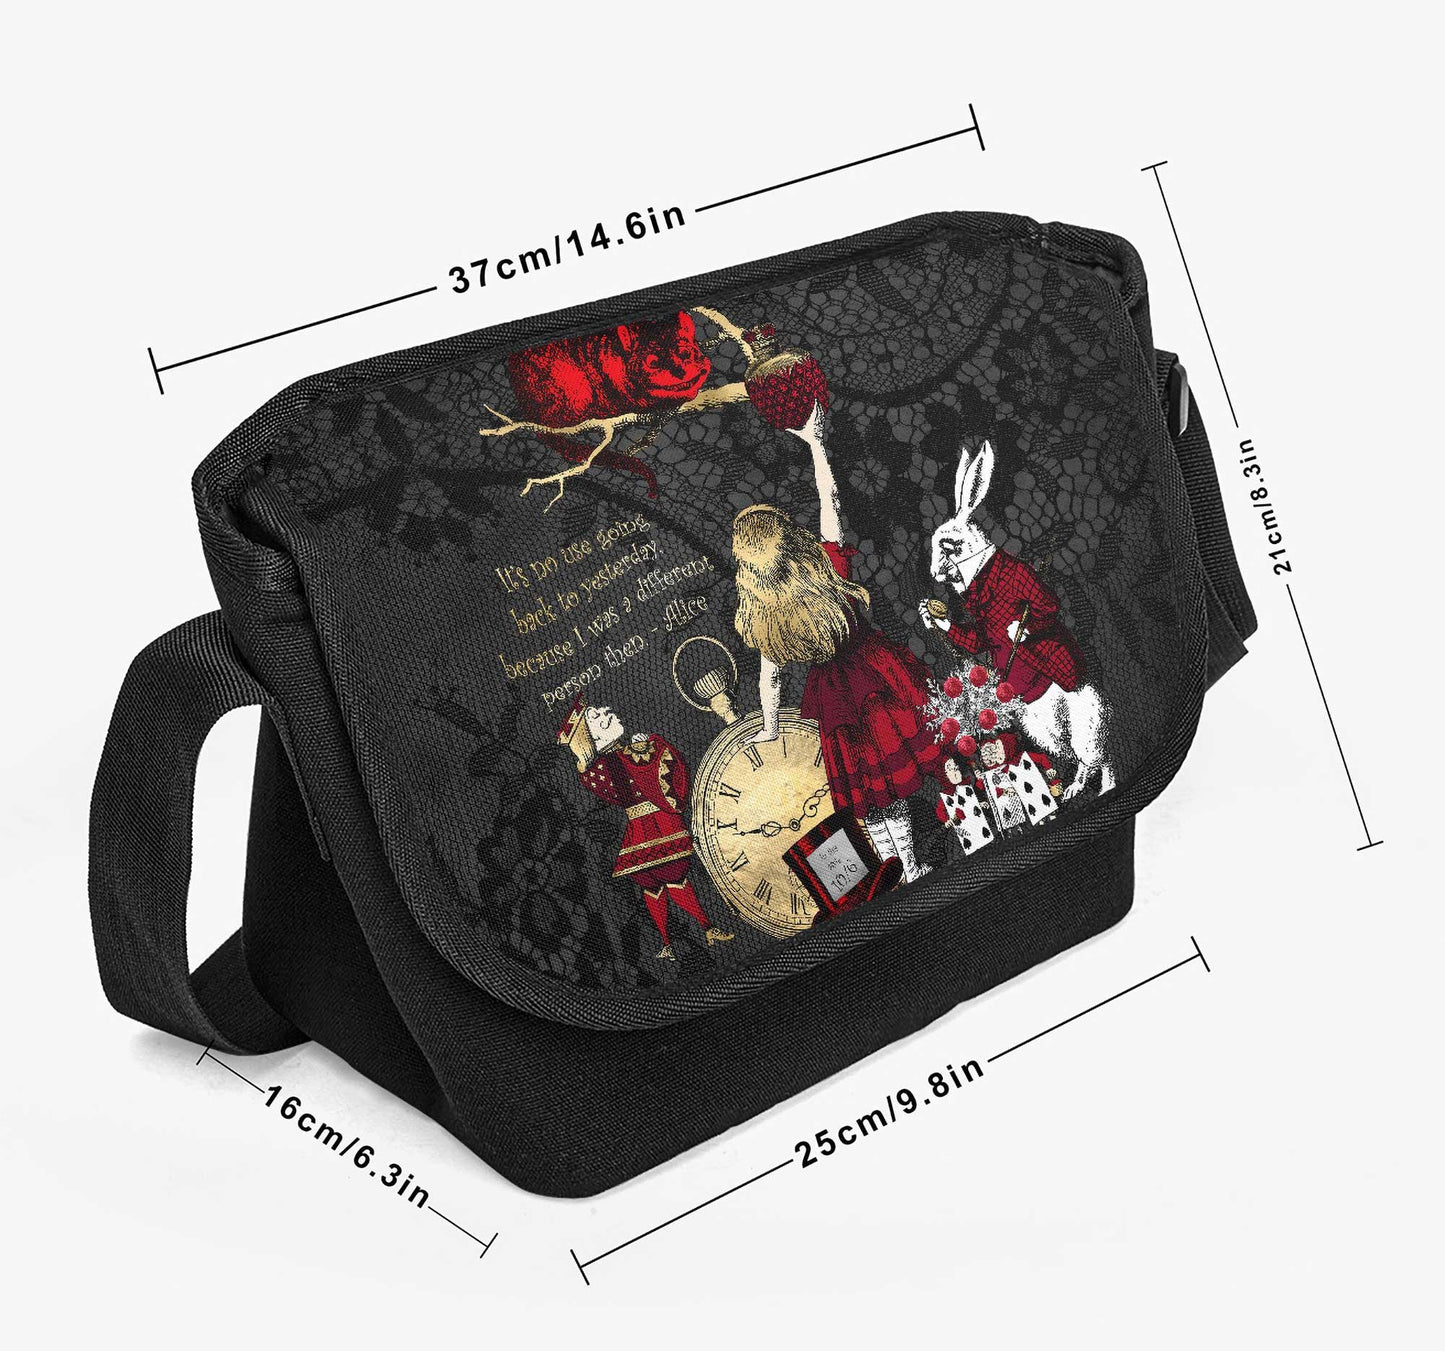 gothic Alice in Wonderland Messenger Bag made from canvas with a gothic gold, red and white Alice in Wonderland character print against a black lace print background, image has the dimensions around the bag